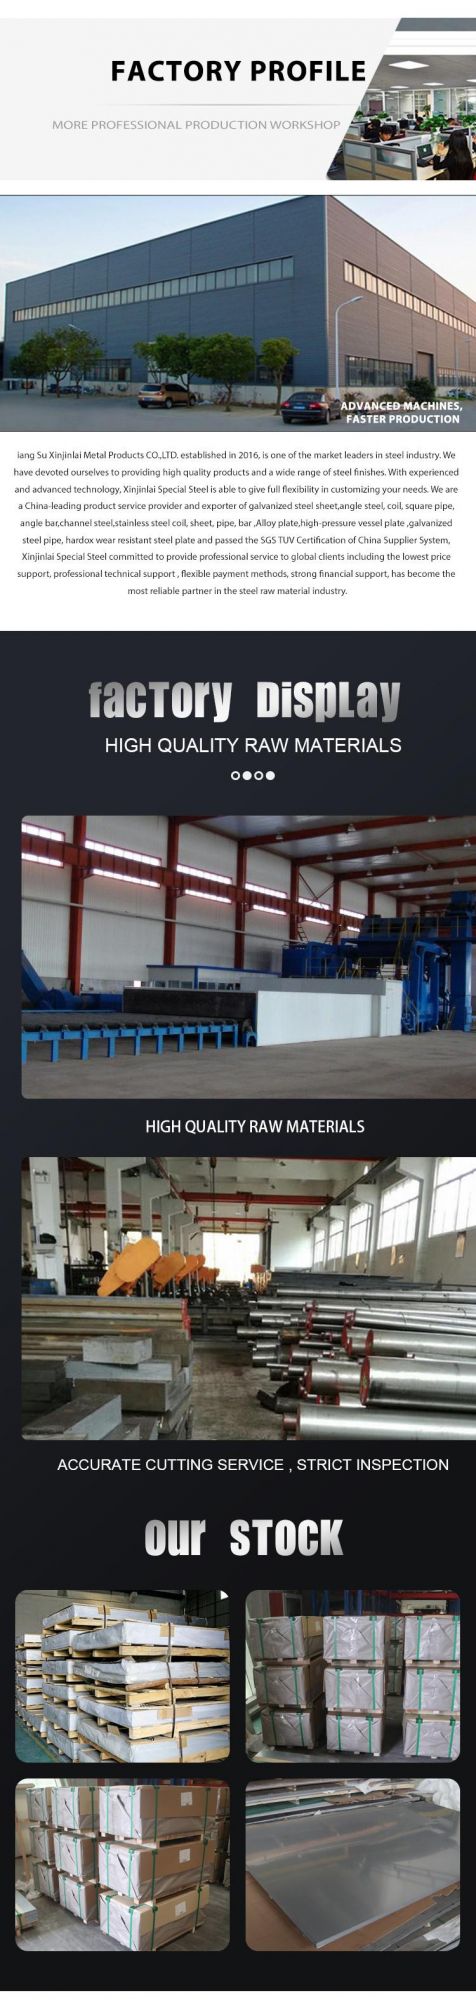 China Wholesale Price Spot High Performance 2205 Stainless Steel Bar Round Steel Bar Hot-Rolled Corrosion Resistant Steel B